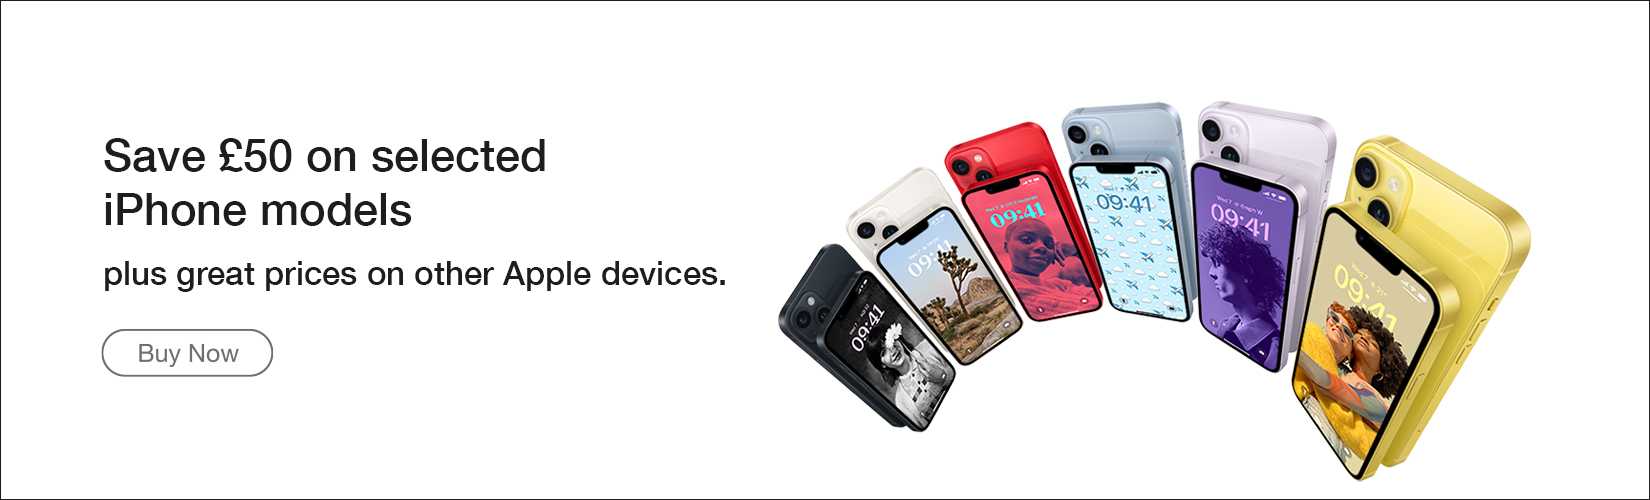 Save £50 on selected iPhone models plus great prices on other Apple devices. Buy now.